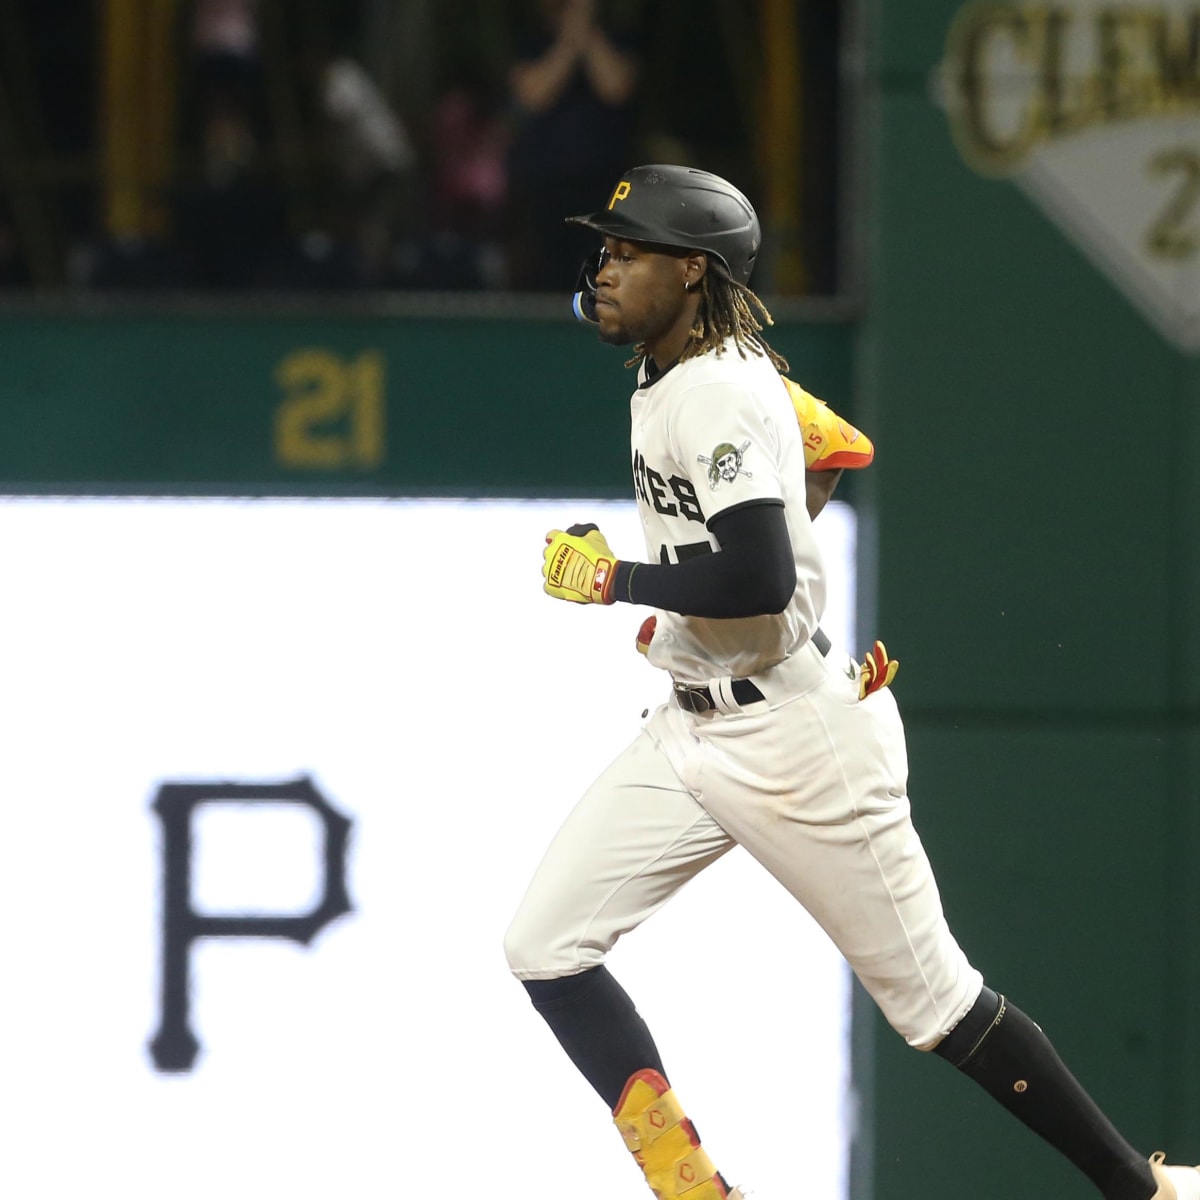 Pirates gush over Oneil Cruz's incredible throw to first base